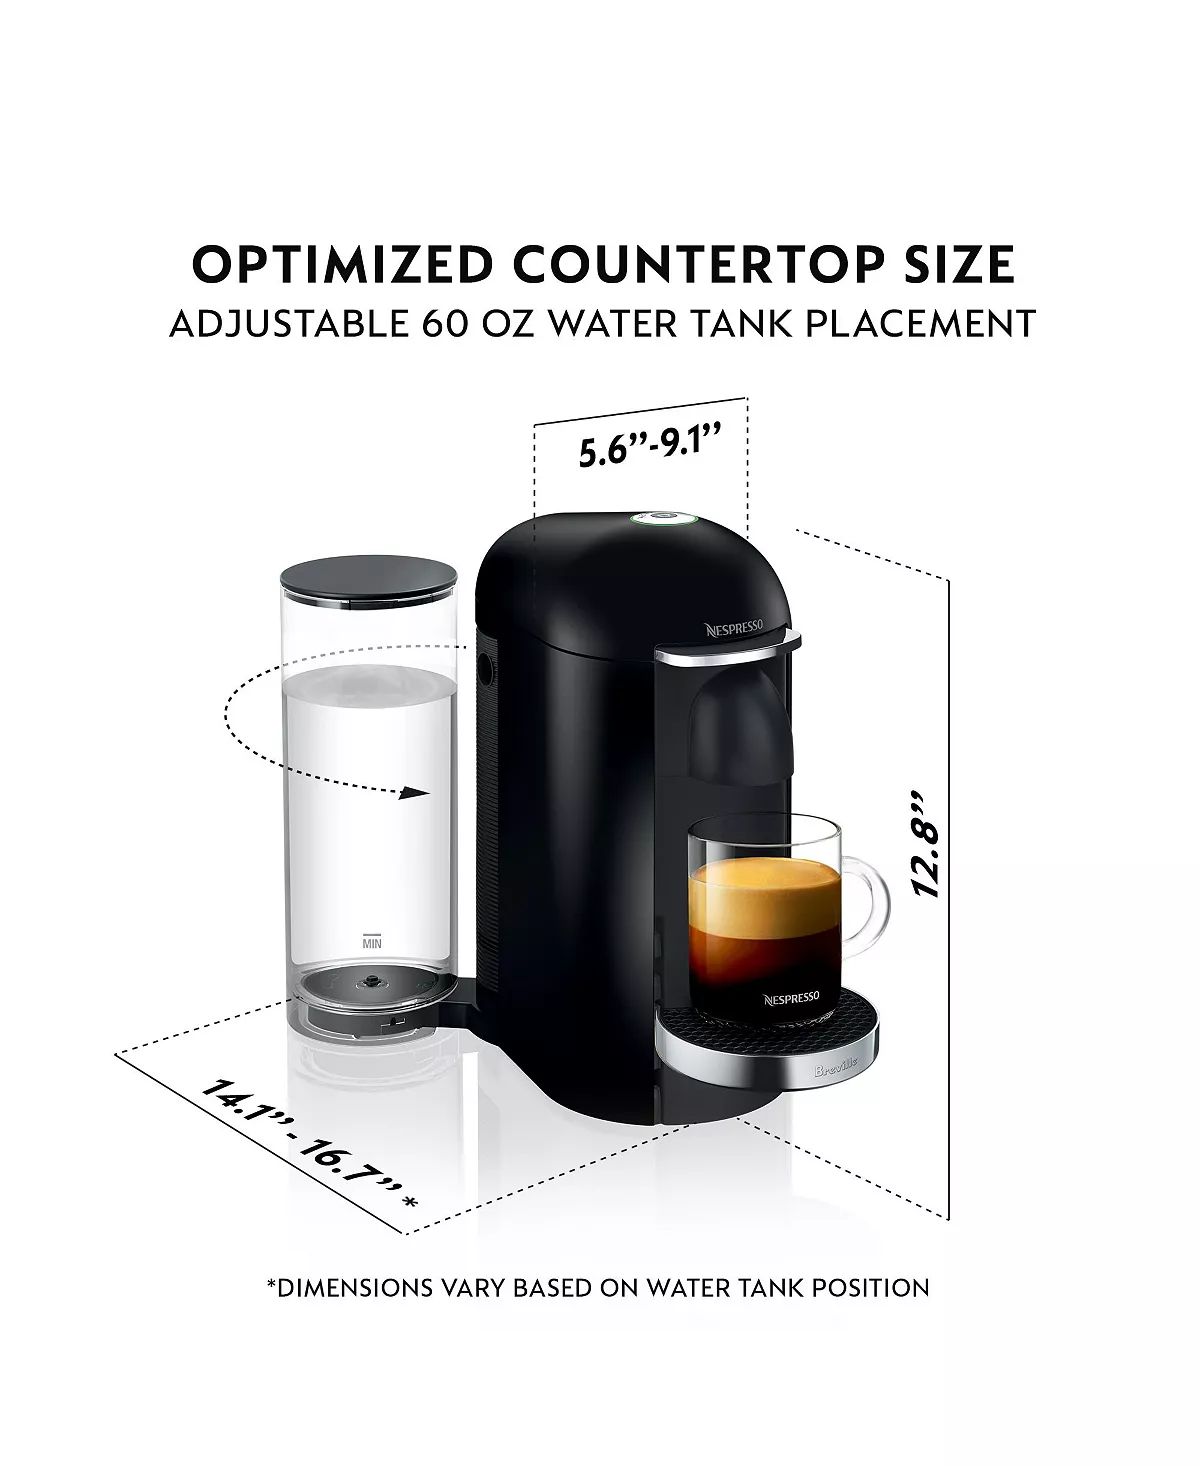 Vertuo Plus Deluxe Coffee and Espresso Maker by Breville, Piano Black with Aeroccino Milk Frother | Macys (US)